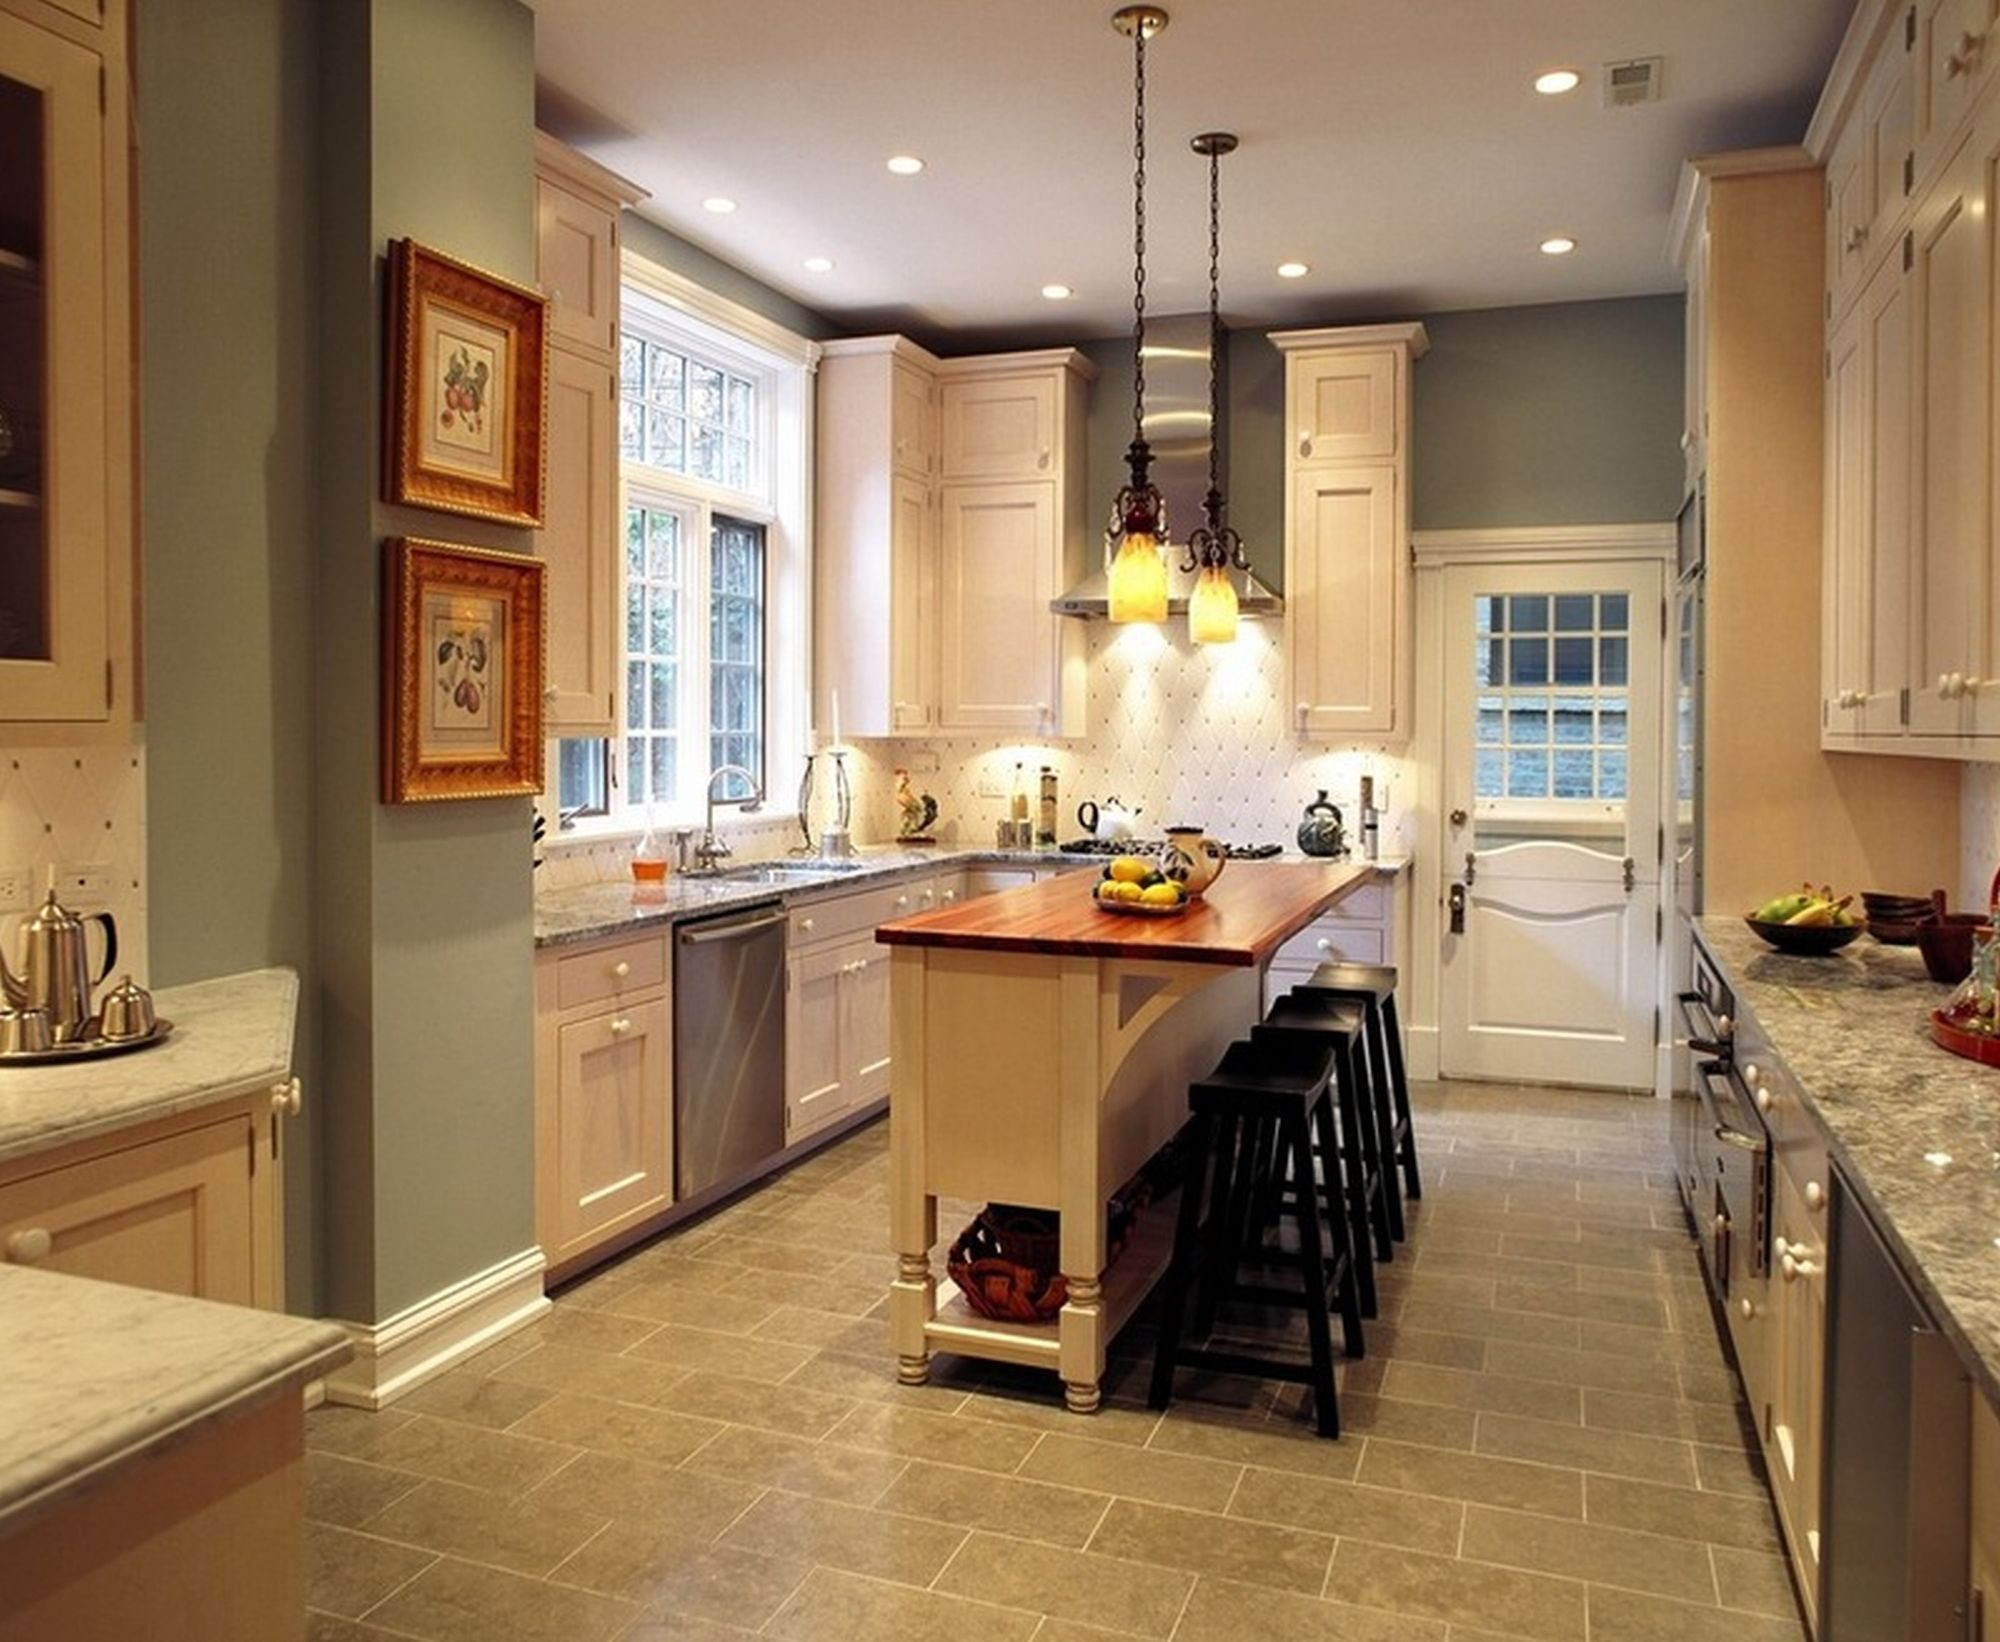 Small Kitchen Paint Ideas
 4 Steps to Choose Kitchen Paint Colors with Oak Cabinets